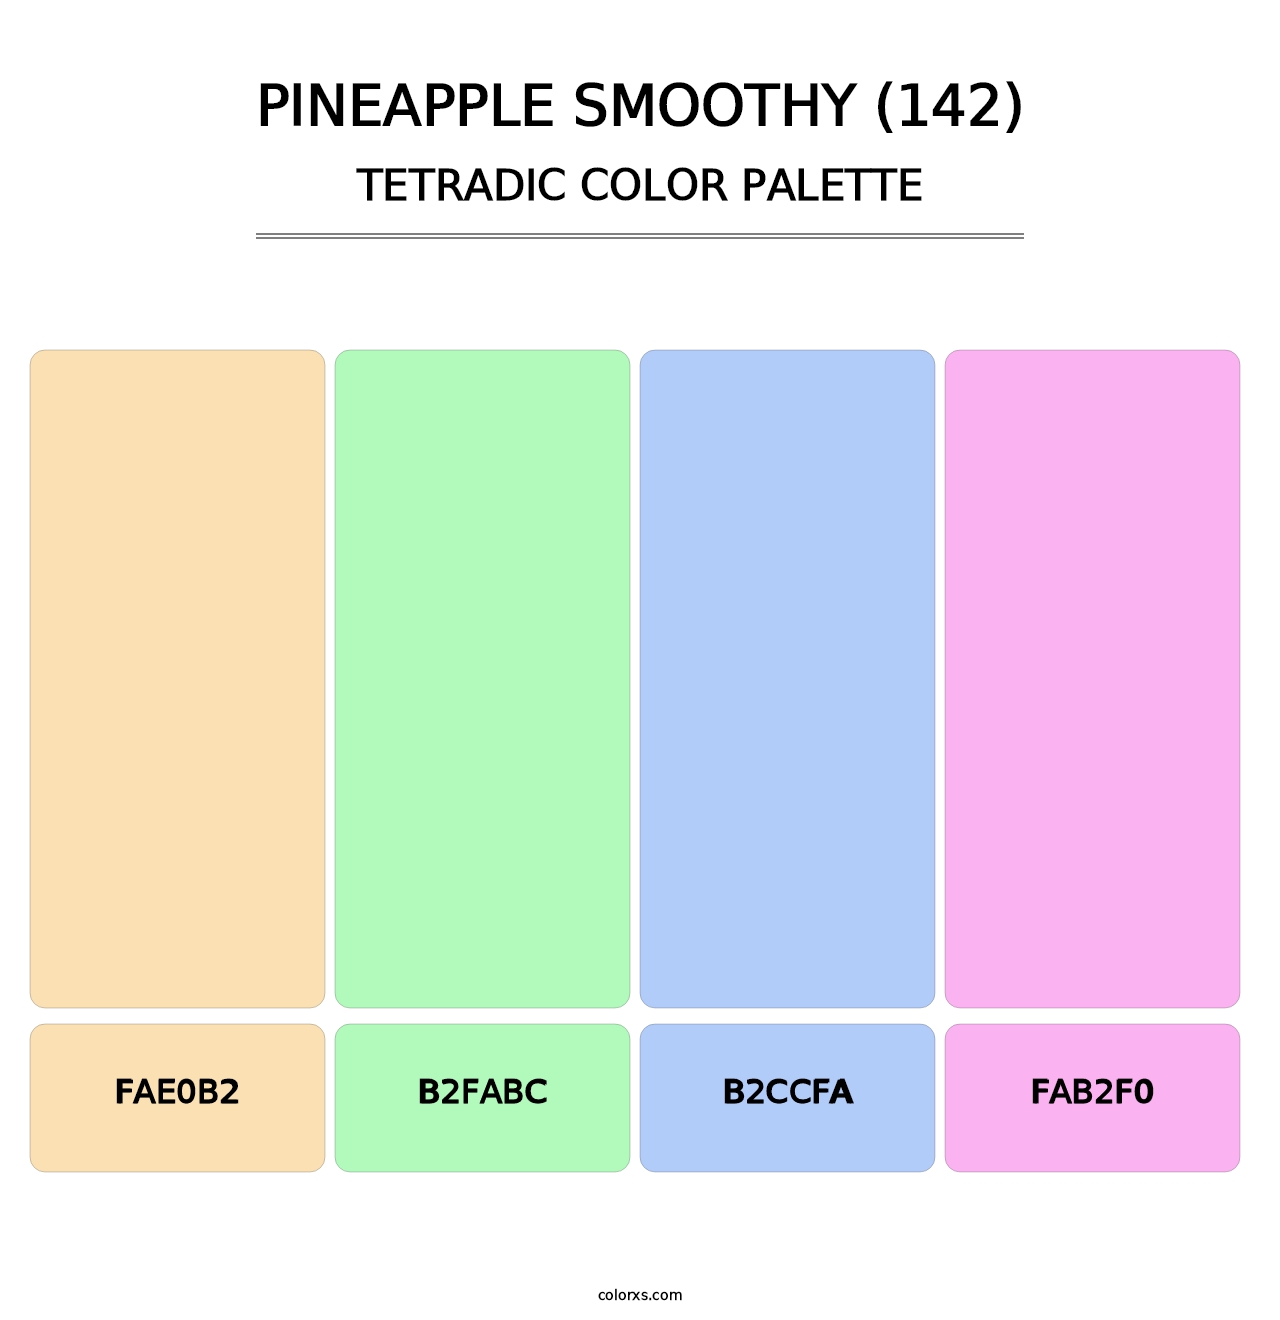 Pineapple Smoothy (142) - Tetradic Color Palette